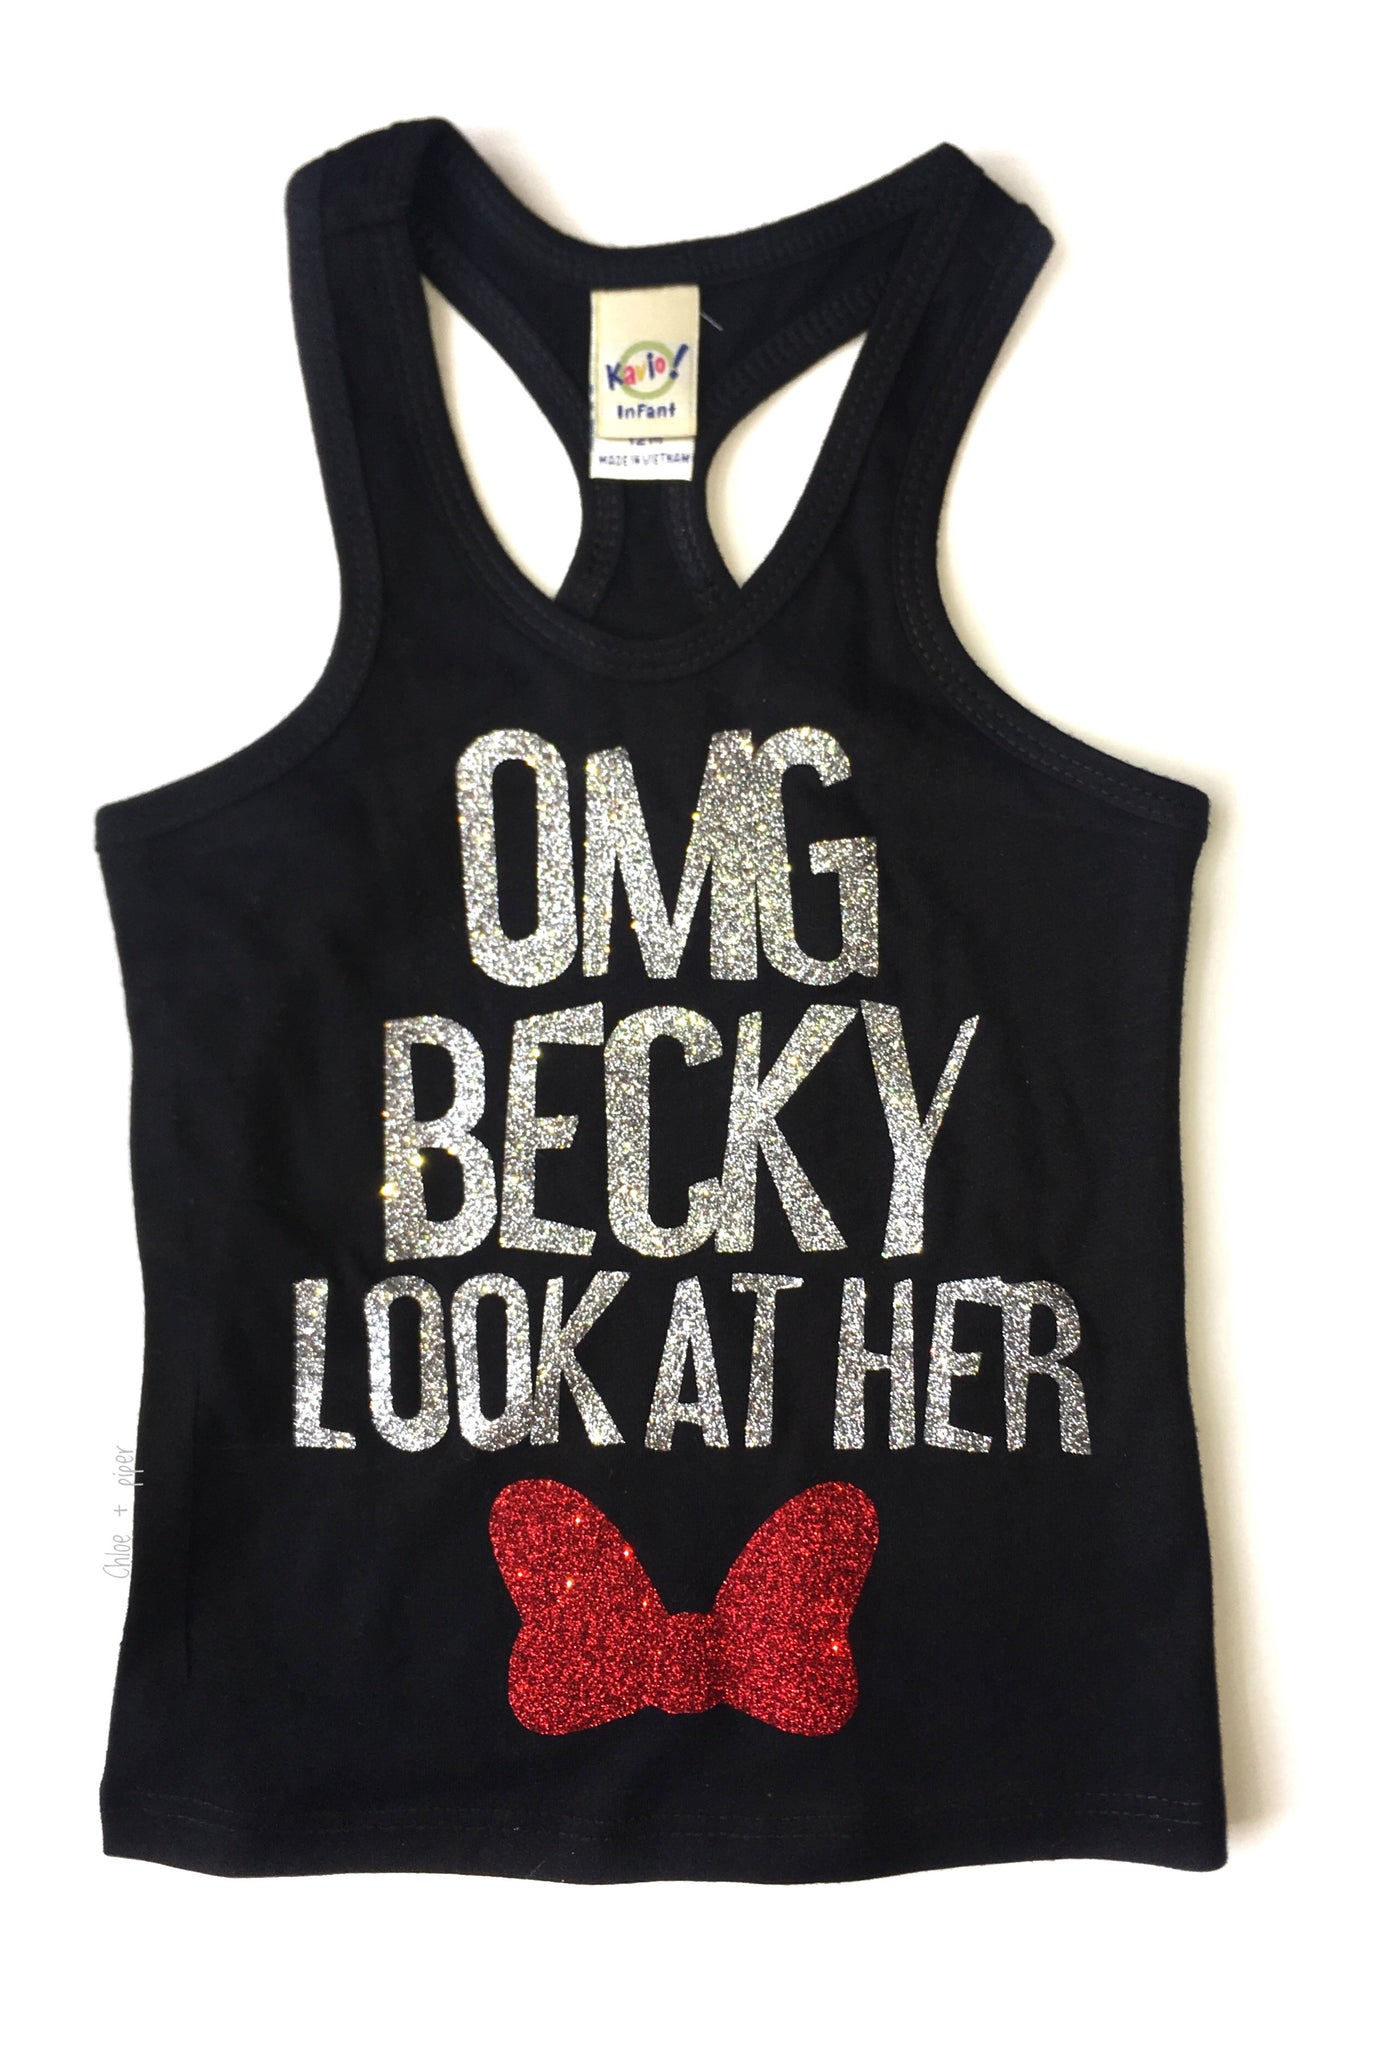 OMG Becky Look At Her Bow Razorback Tank